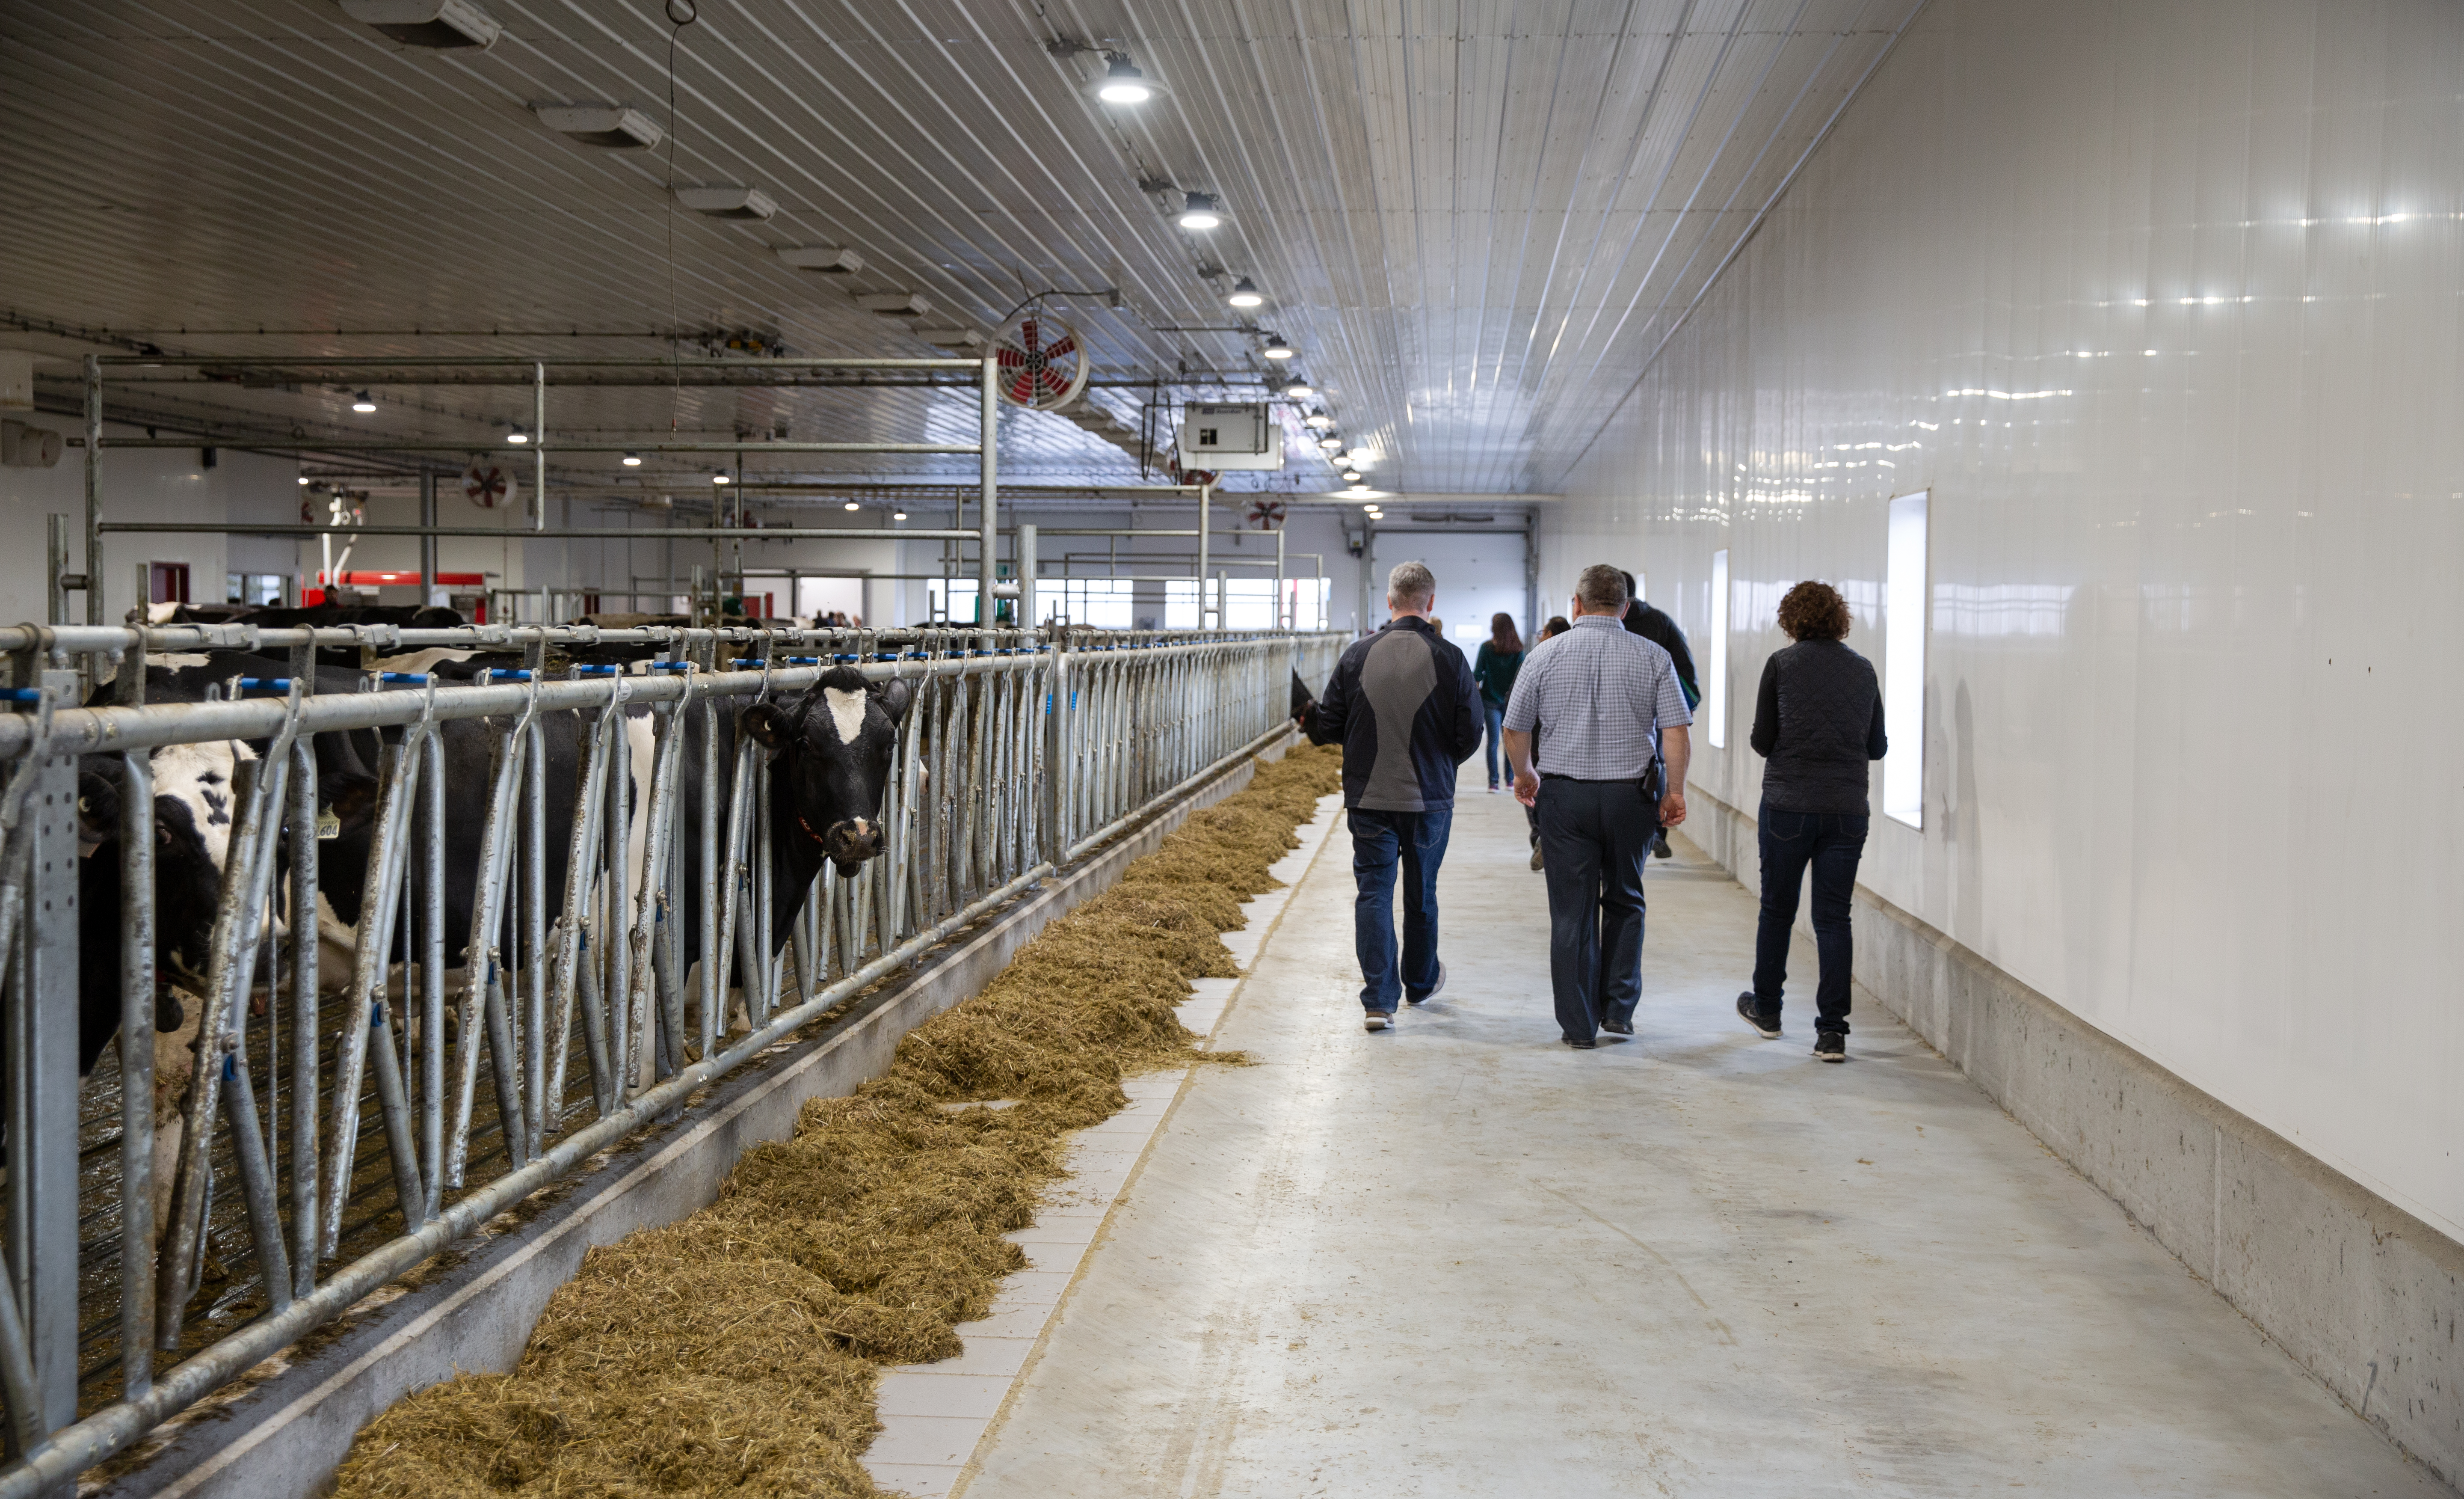 The feed aisle where a robotic feeder travels